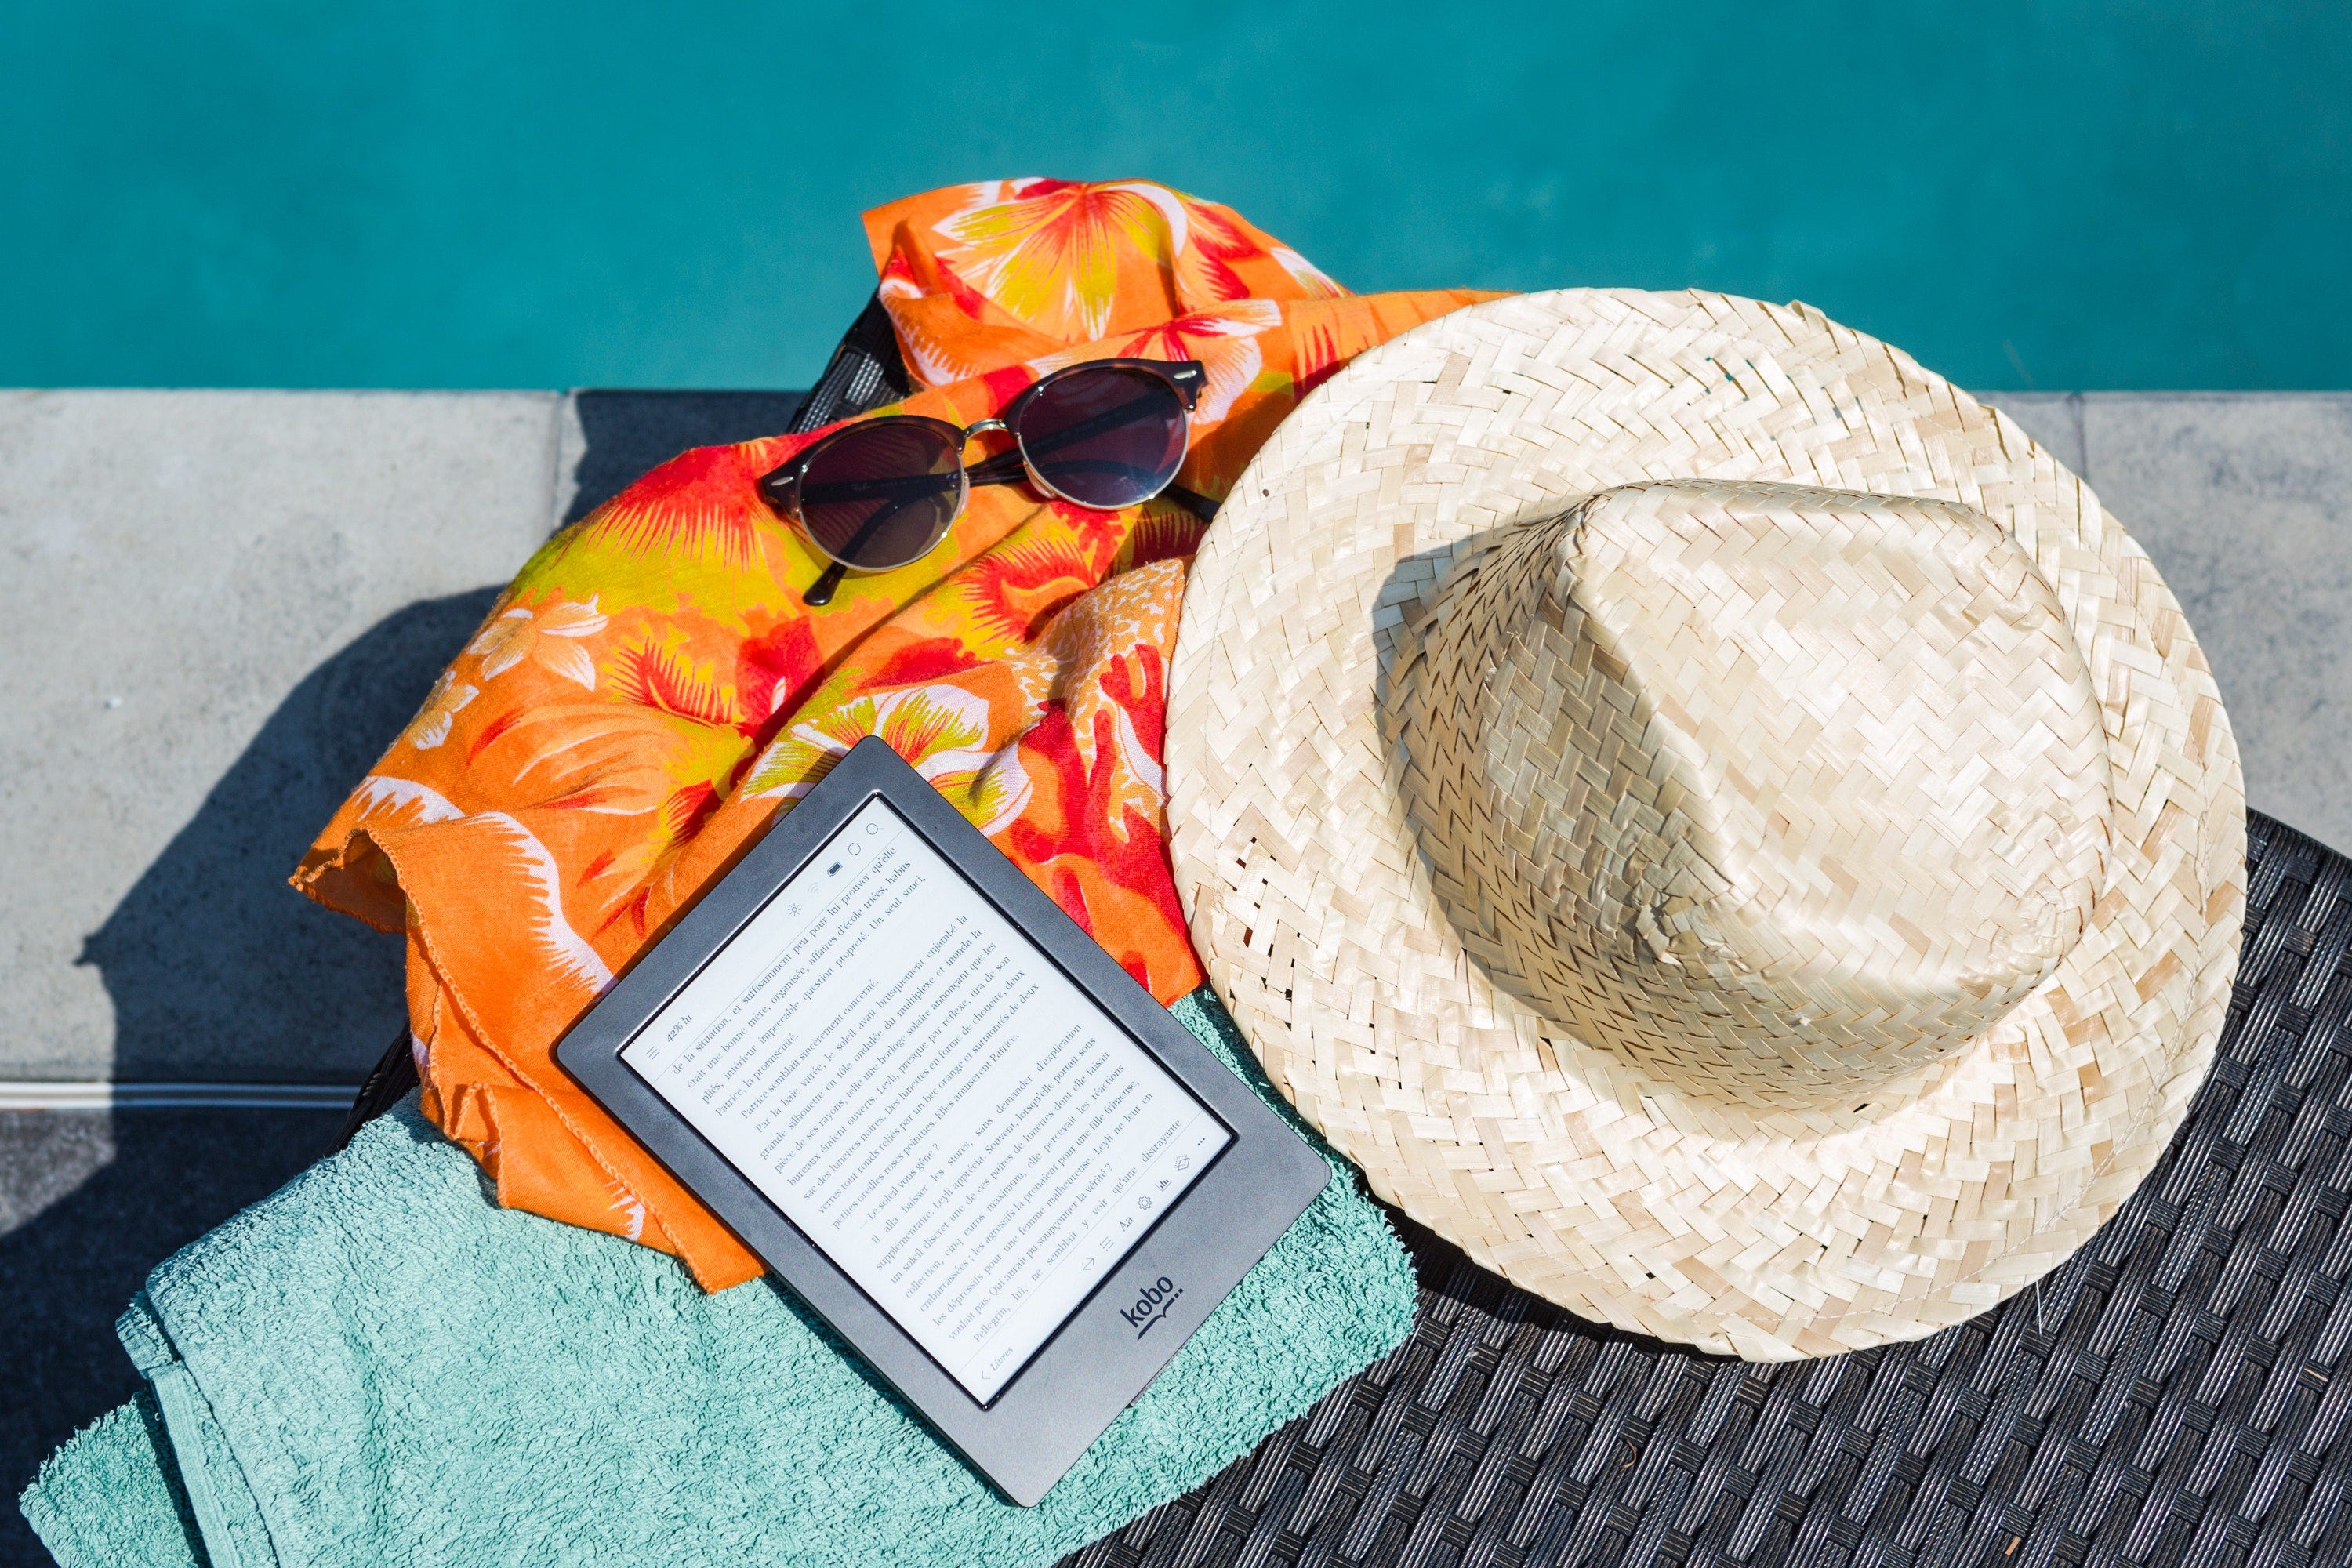 The best summer gadgets of 2019 to make it the best ever